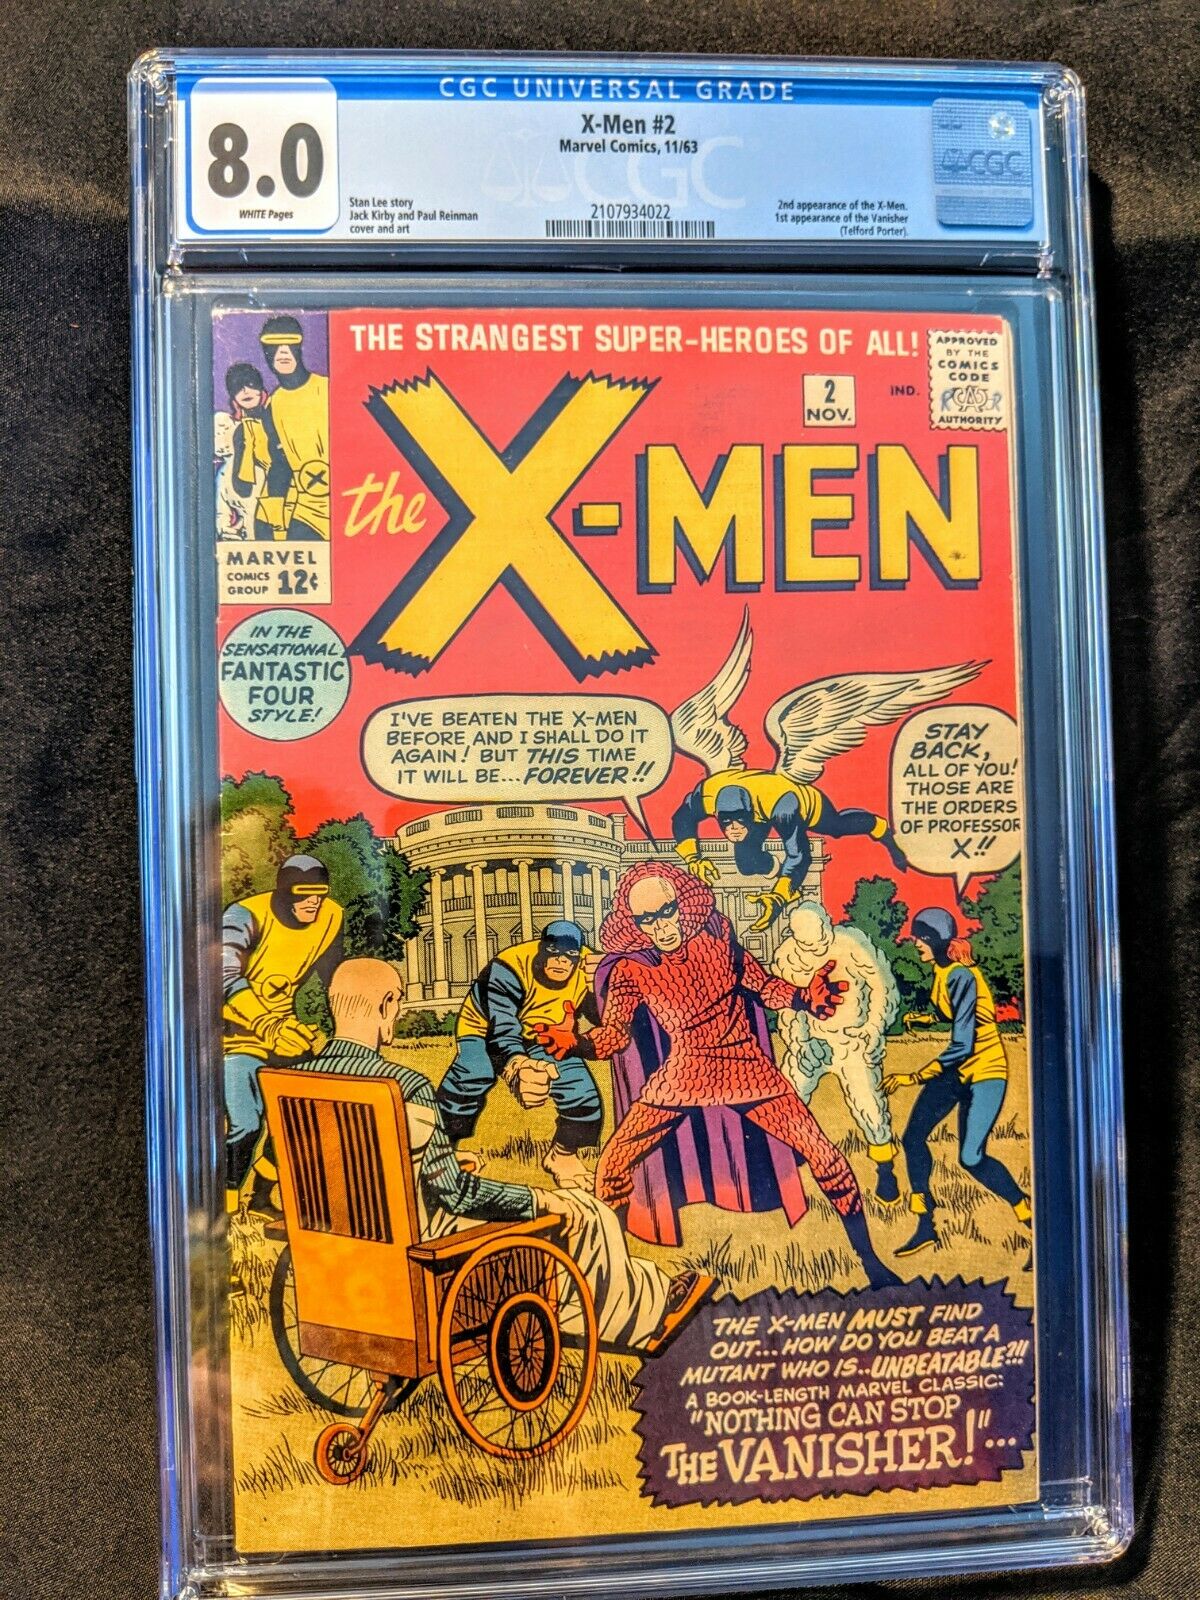 XMen 2 1163 CGC 80 WHITE Pages Jack Kirby Stan Lee 1963